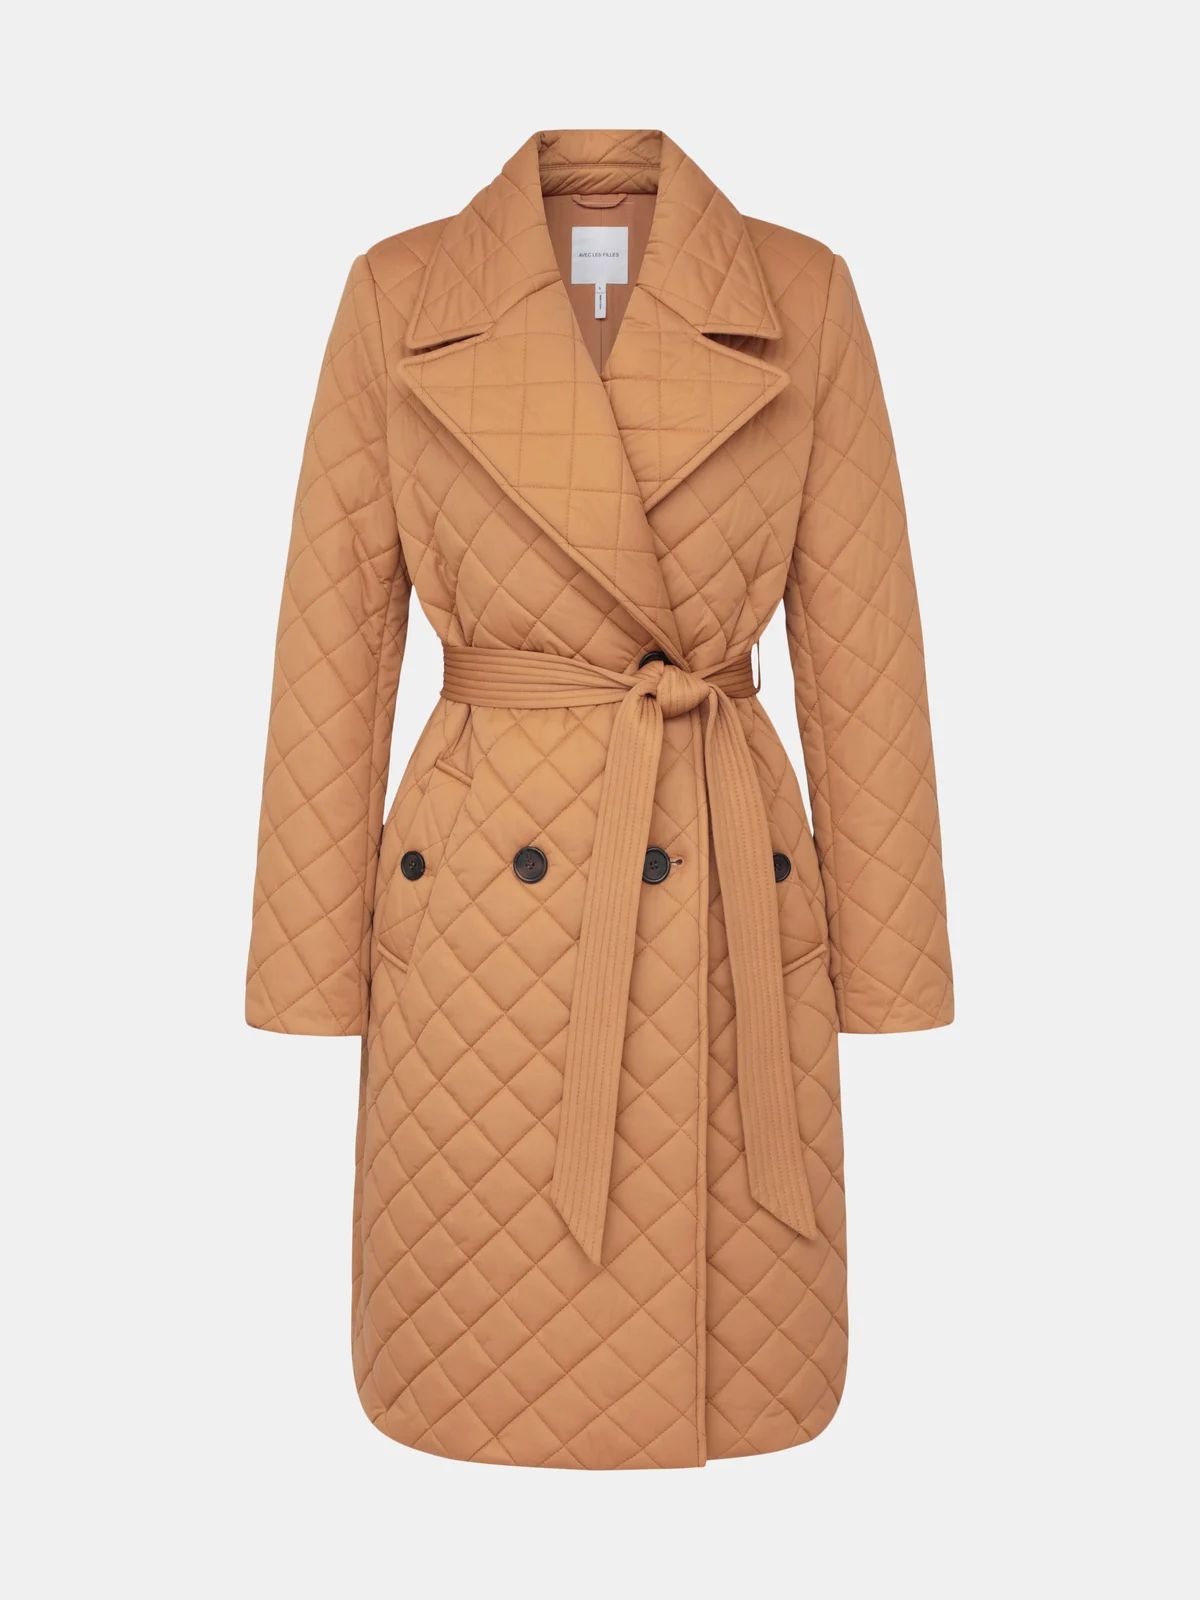 Diamond Quilted Double-Breasted Trench | Verishop